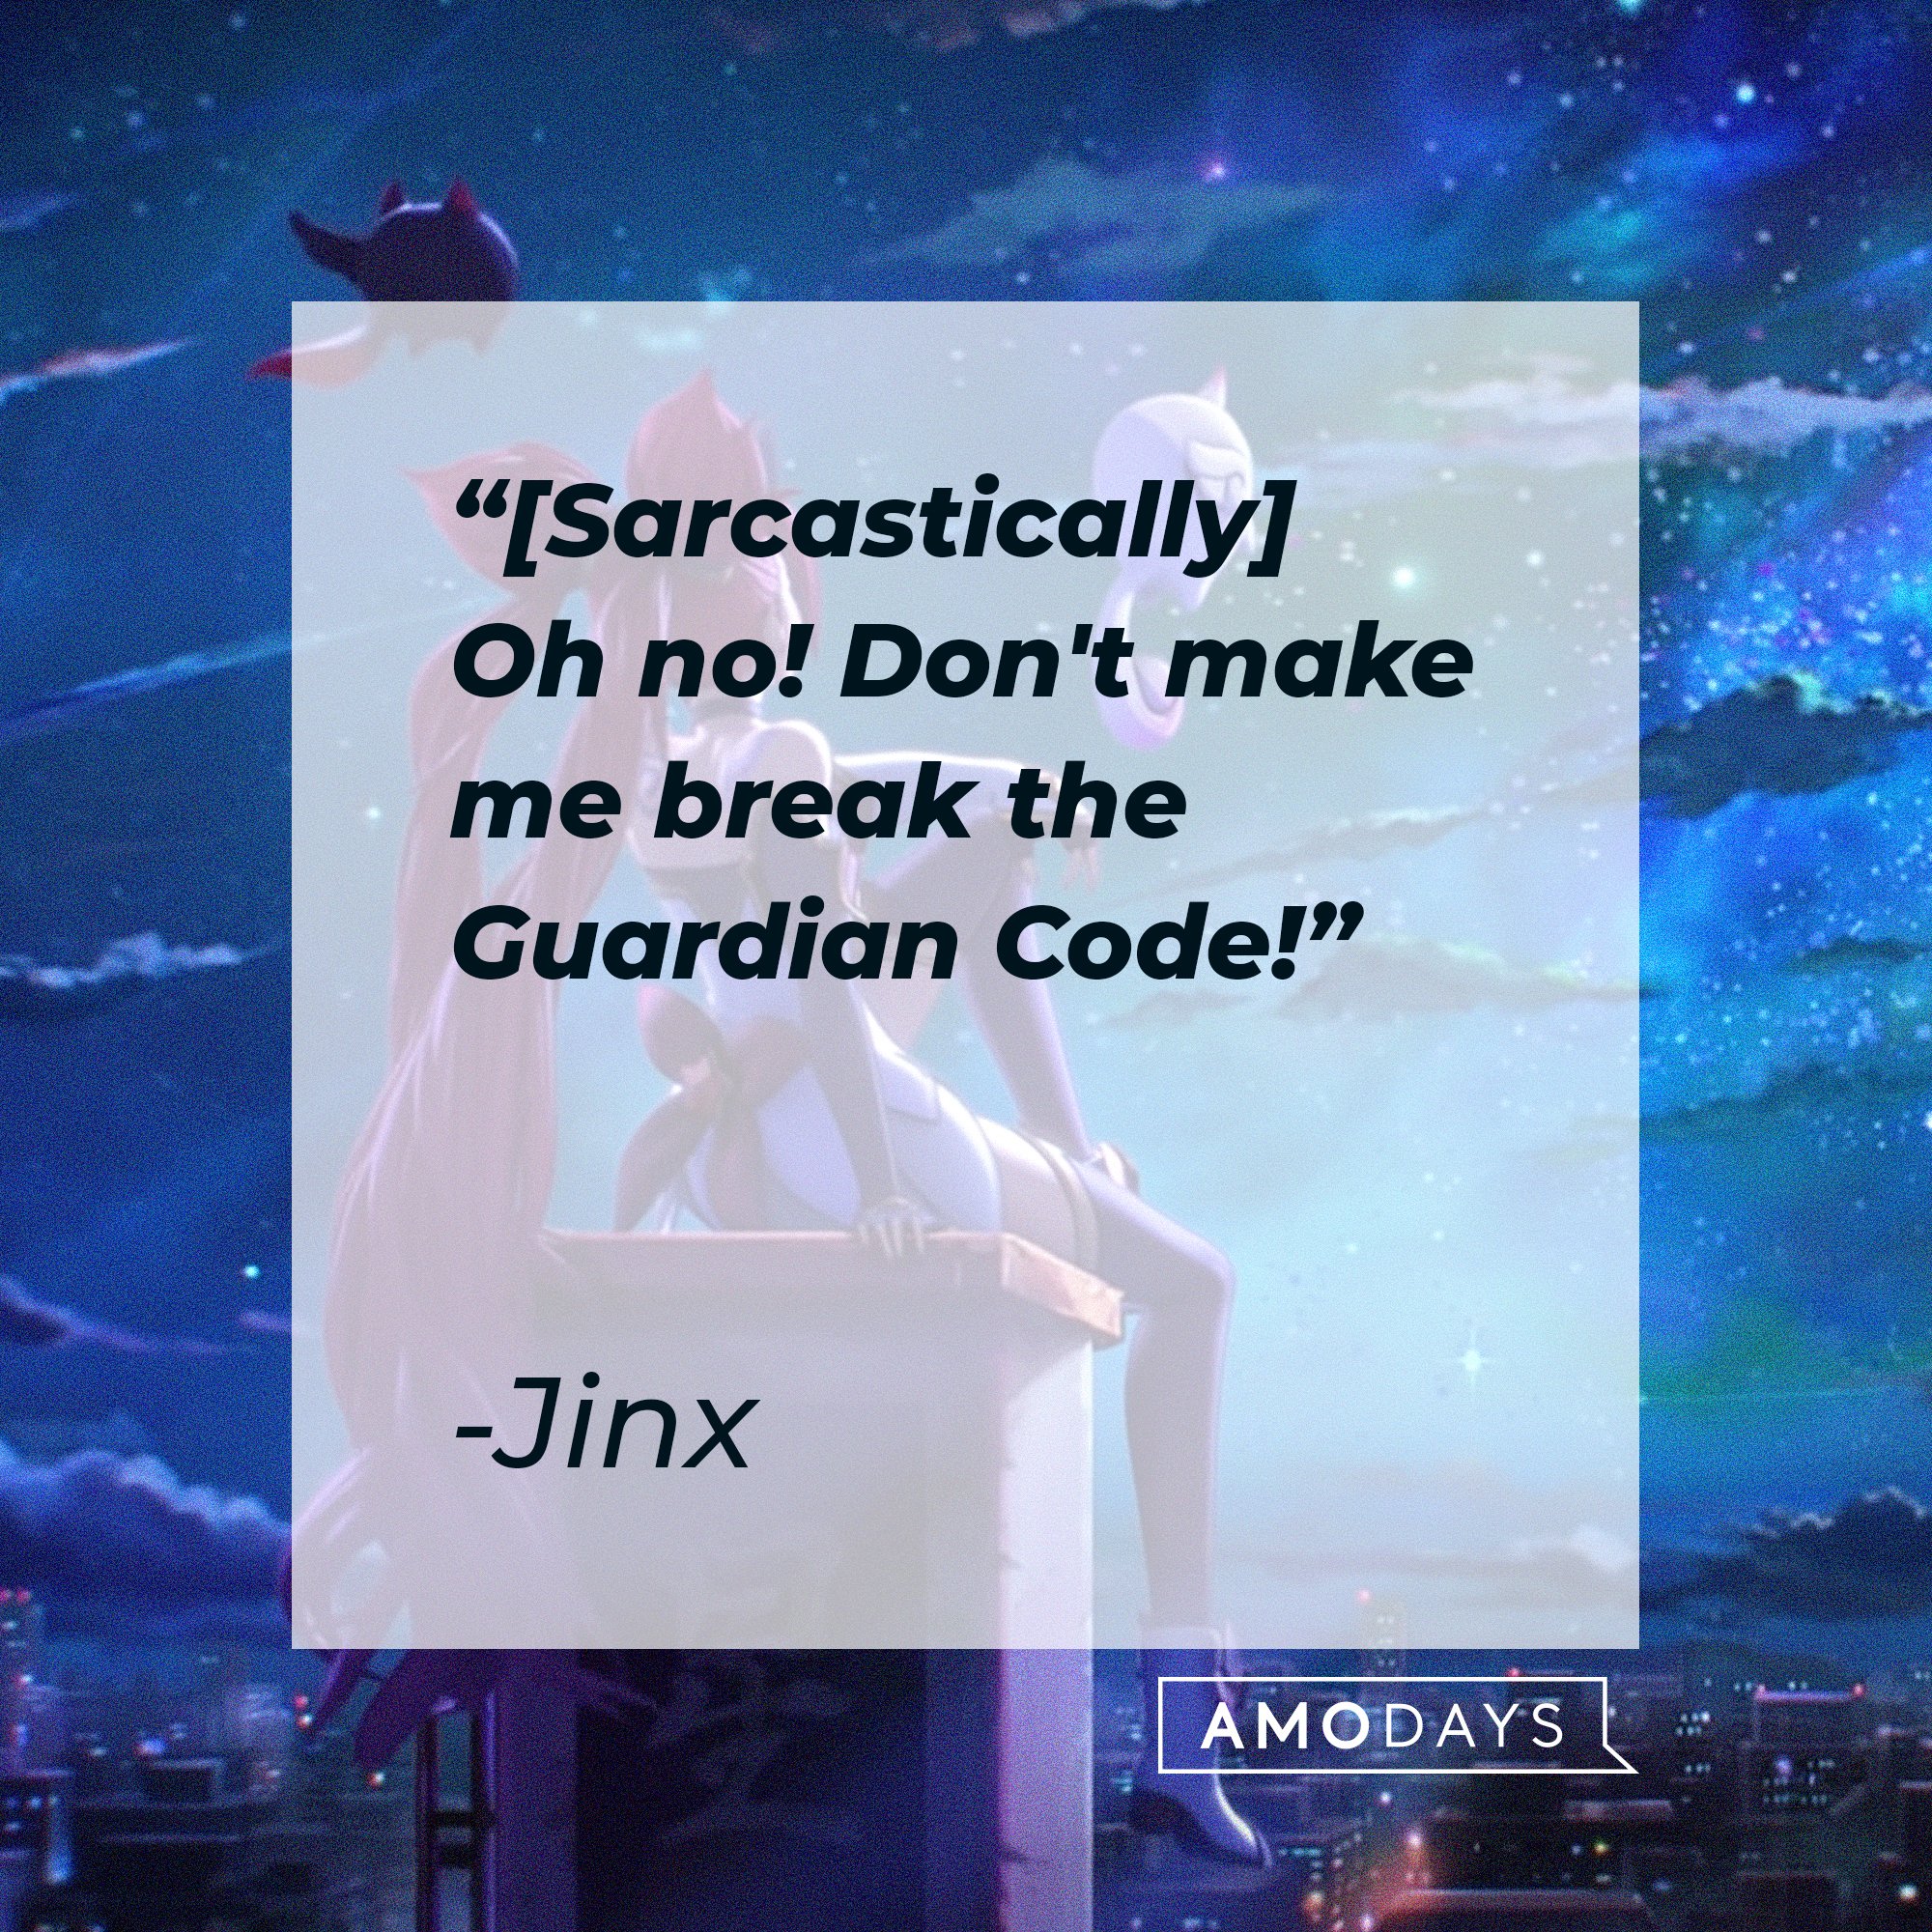 Jinx's quote: “[Sarcastically] Oh no! Don't make me break the Guardian Code!" | Image: AmoDays